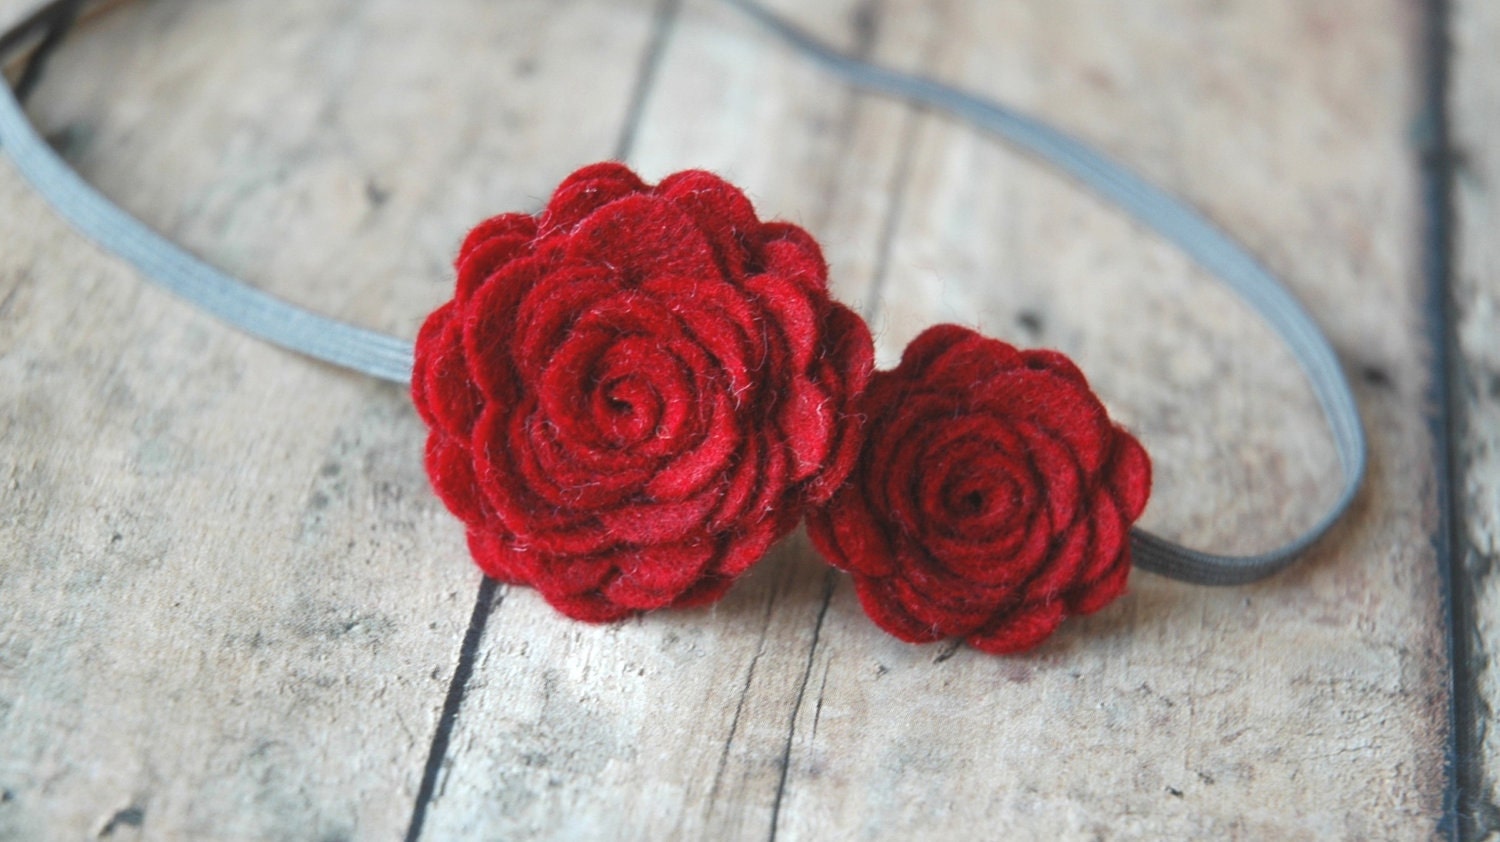 Baby Flower Headband - Felt Flower Headband In Dark Red - Large and Small Roses - For Baby to Adult